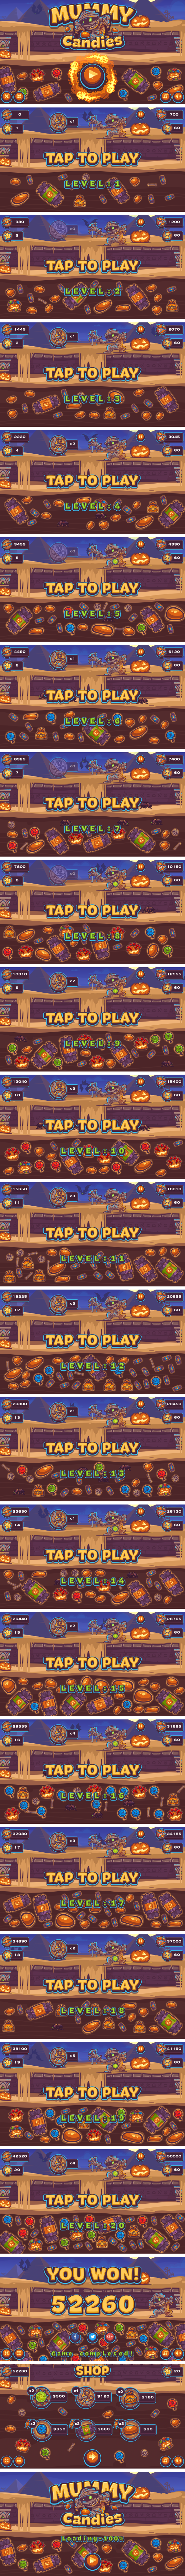 Mummy Candies - HTML5 Game 20 Levels + Mobile Version! (Construct 3 | Construct 2 | Capx) - 2